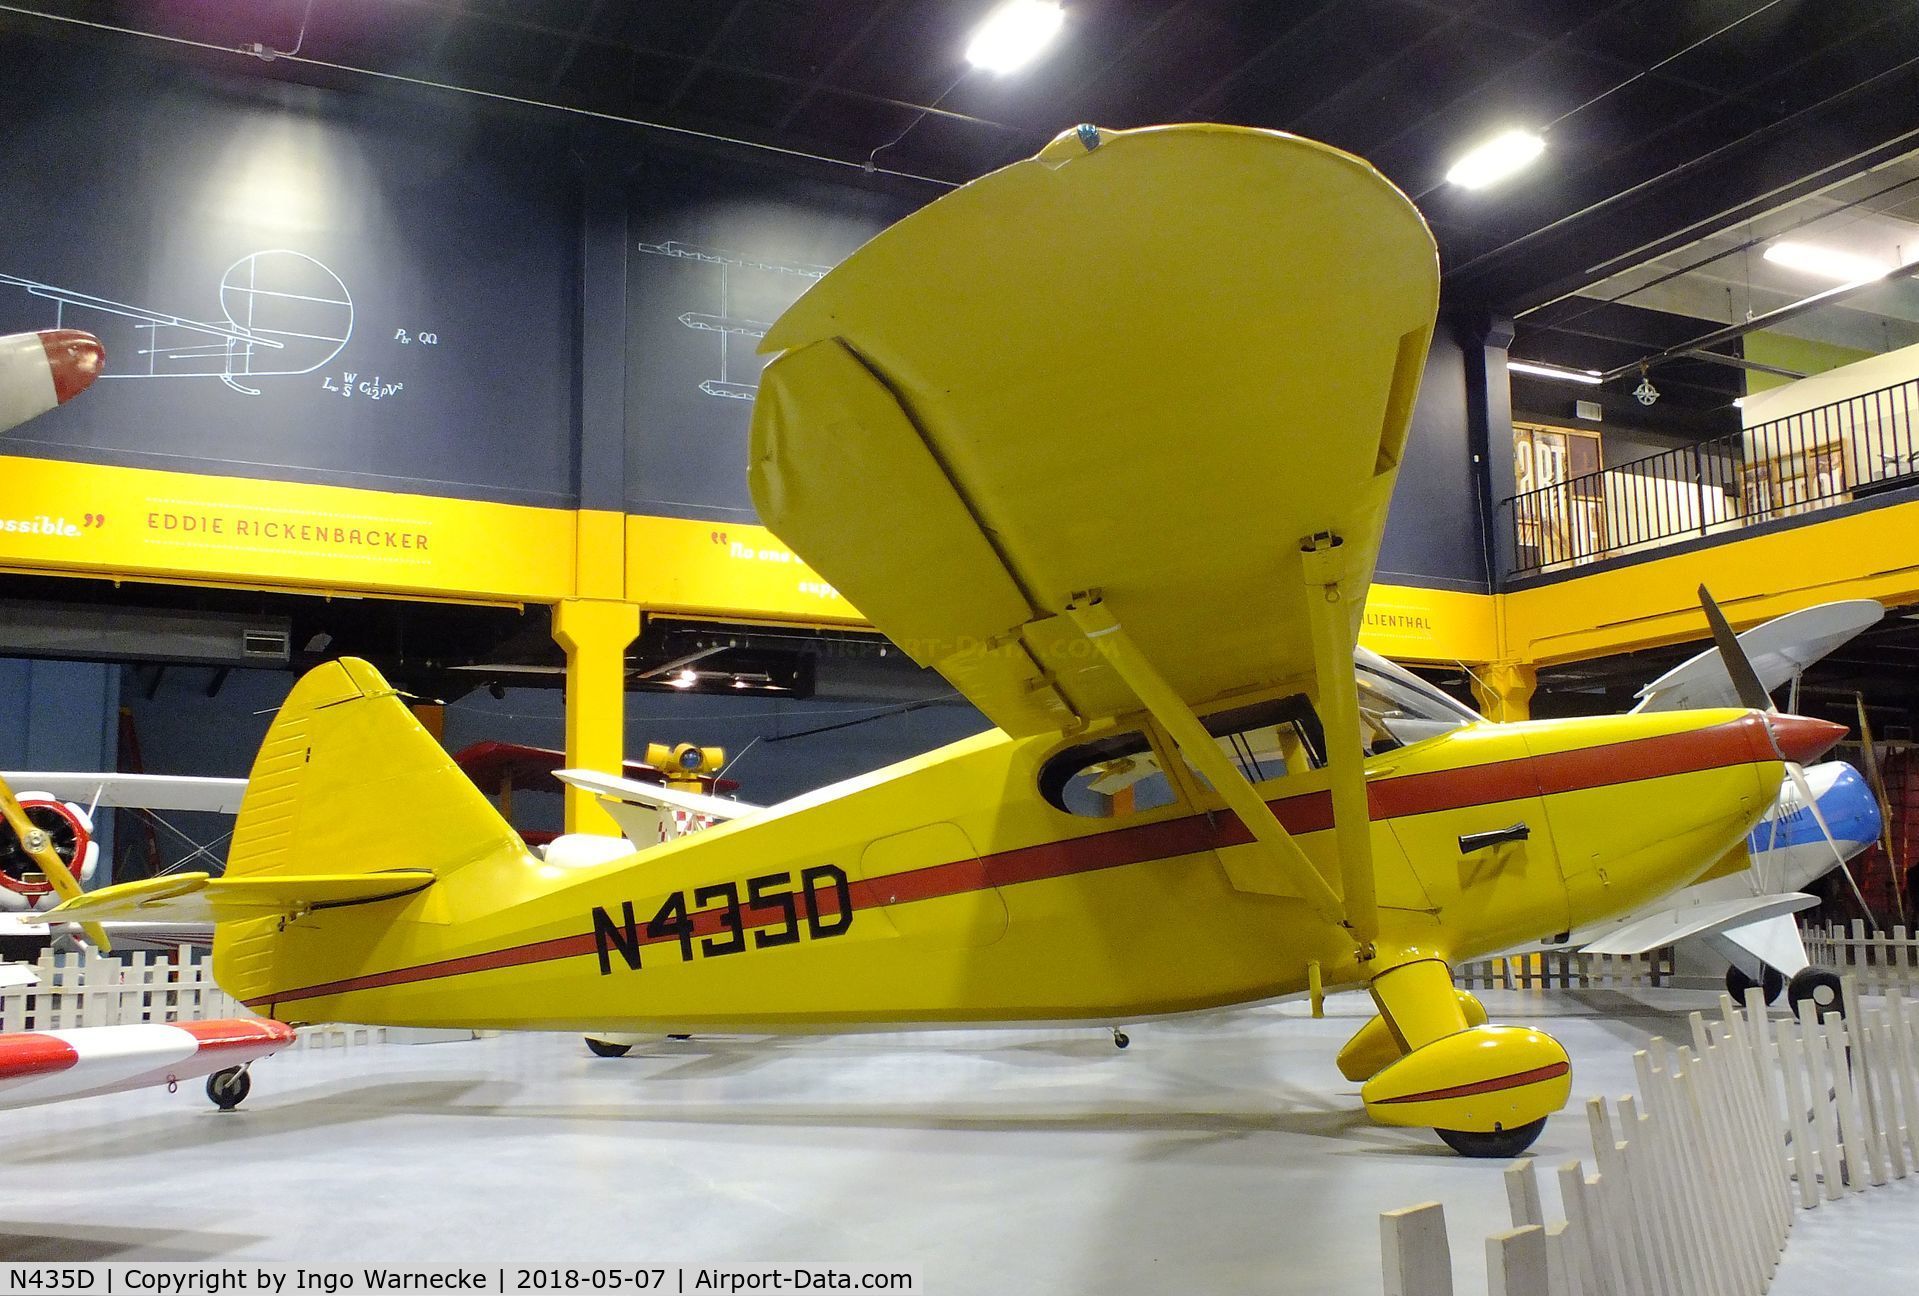 N435D, 1946 Stinson 108-2 Voyager C/N 108-3435, Stinson 108-2 Voyager at the Science Museum Oklahoma, Oklahoma City OK